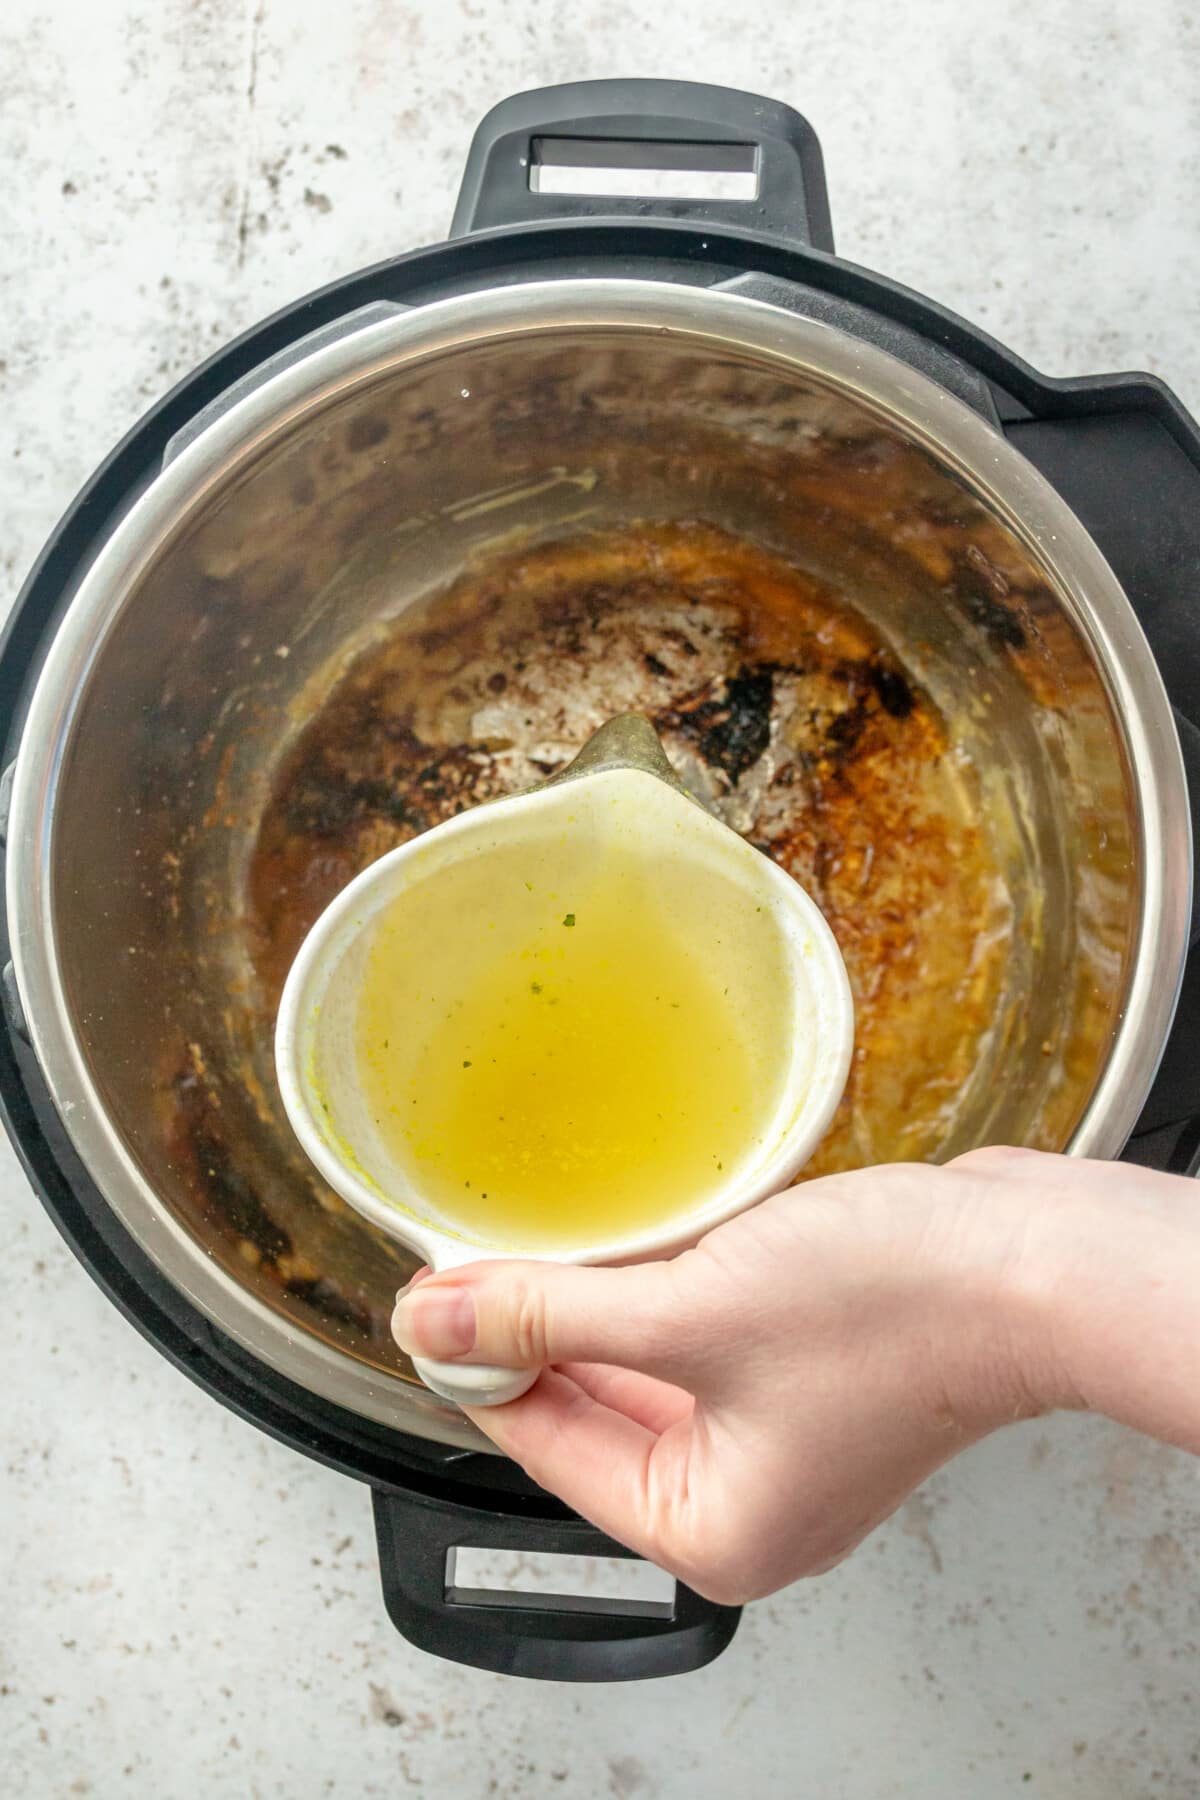 Chicken broth is poured into an instant pot, whilst sitting on a light grey colored surface.